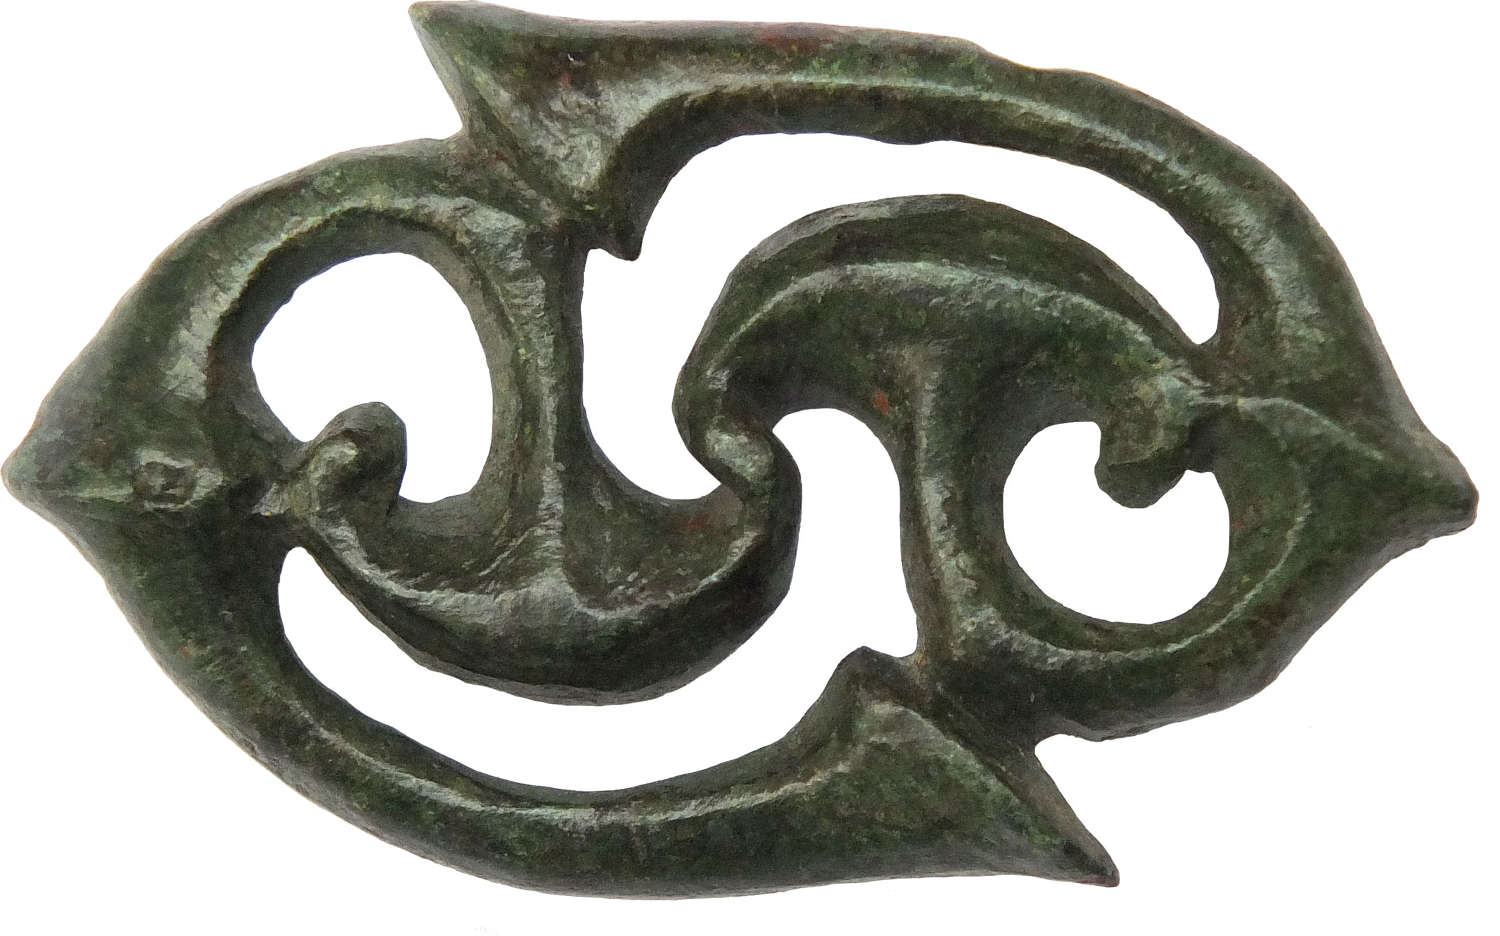 A Celtic bronze brooch in the form of conjoined war trumpets